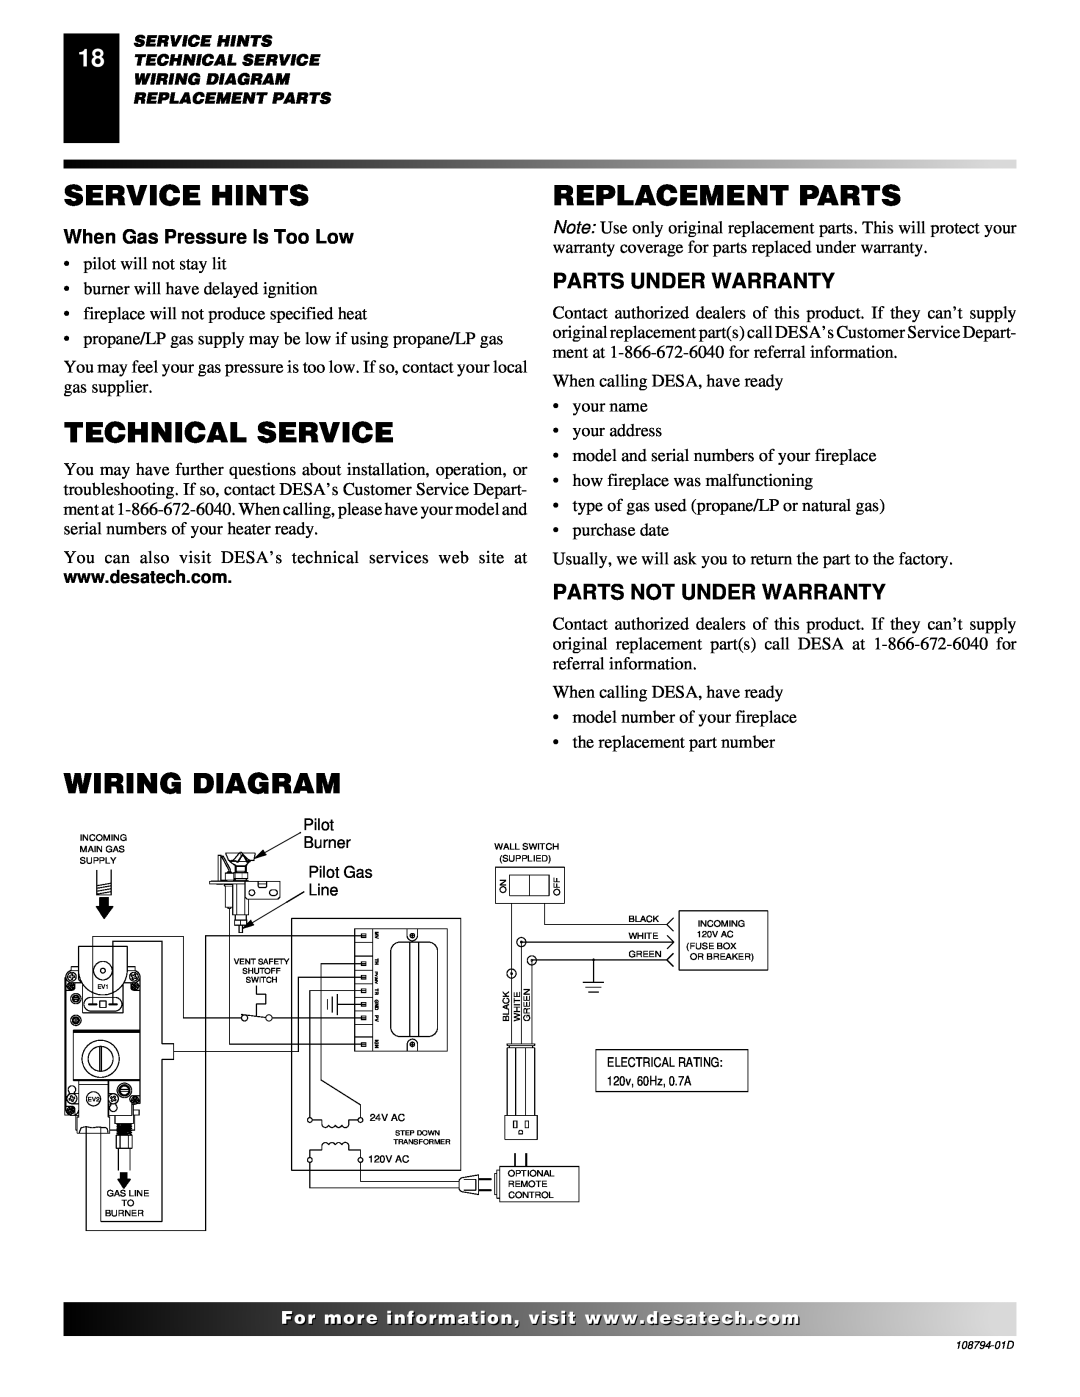 Desa VP325E(B) Service Hints, Technical Service, Wiring Diagram, Replacement Parts, When Gas Pressure Is Too Low 